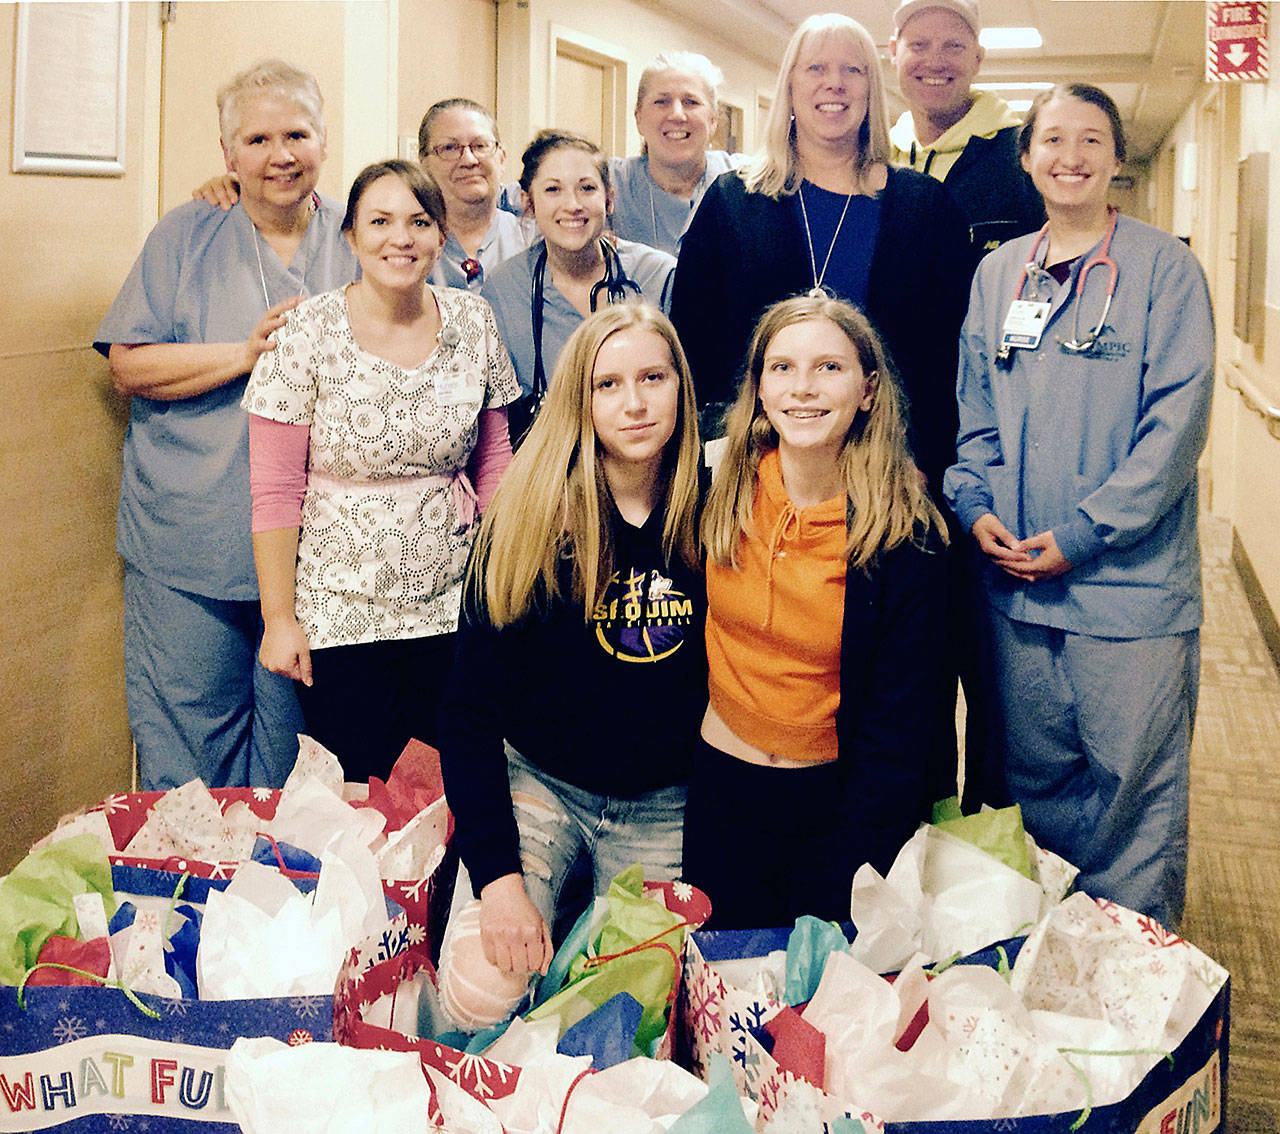 Milestone: Hastings family continues gift bag tradition